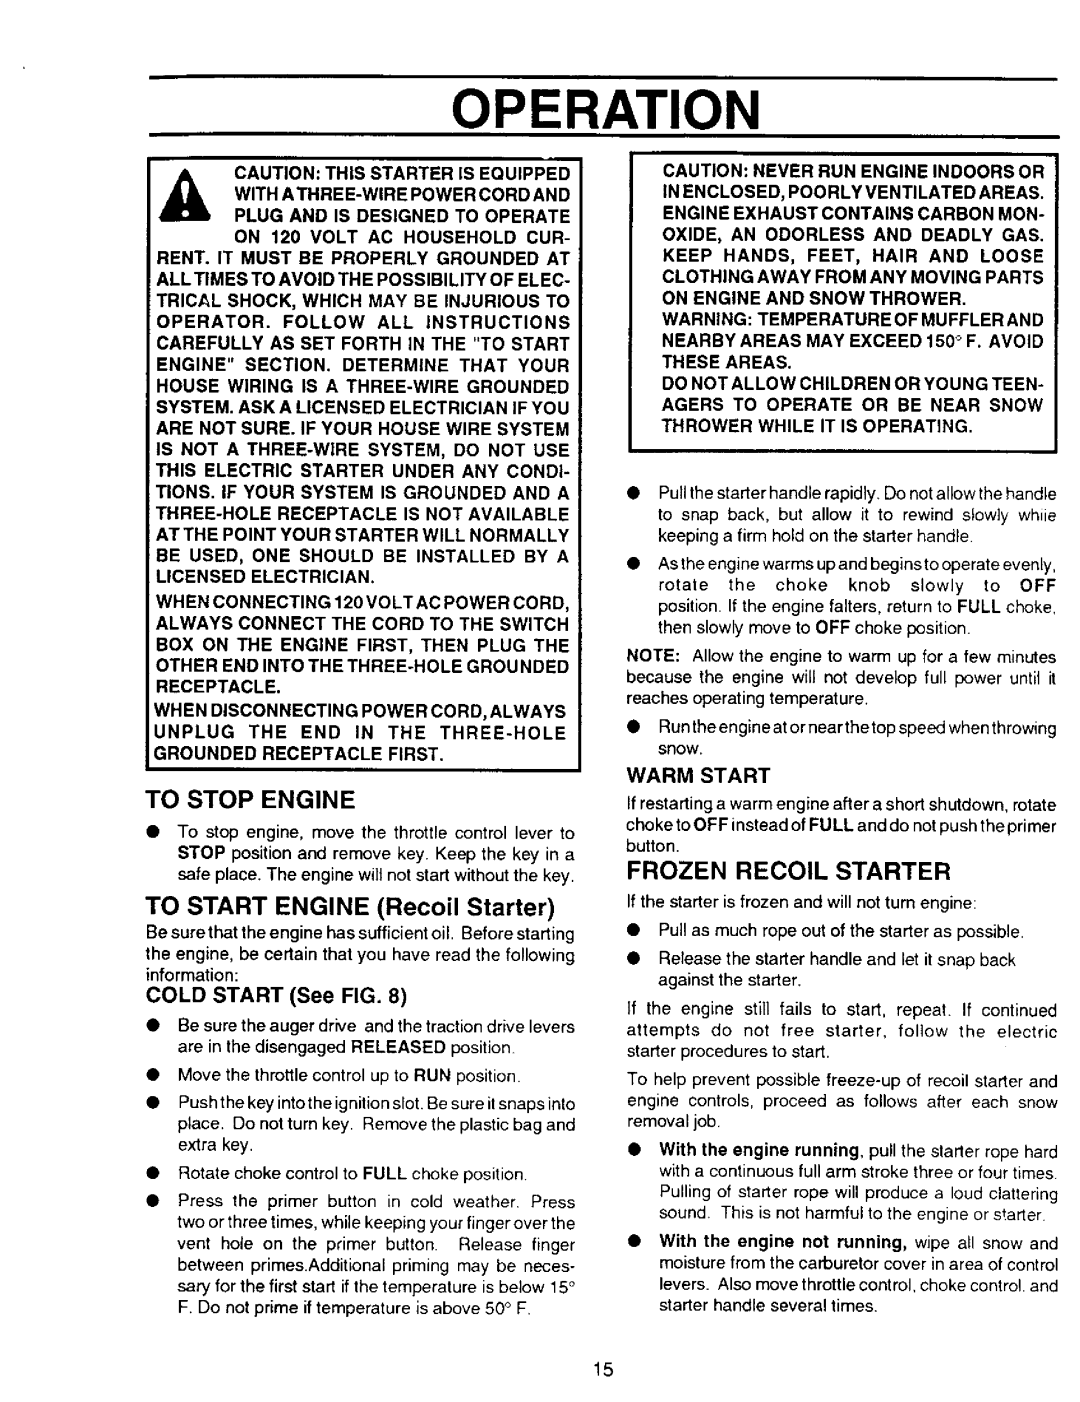 Sears 536.886331 TO START ENGINE Recoil Starter, Frozen Recoil Starter, COLD START See FIG, Operation, To Stop Engine 